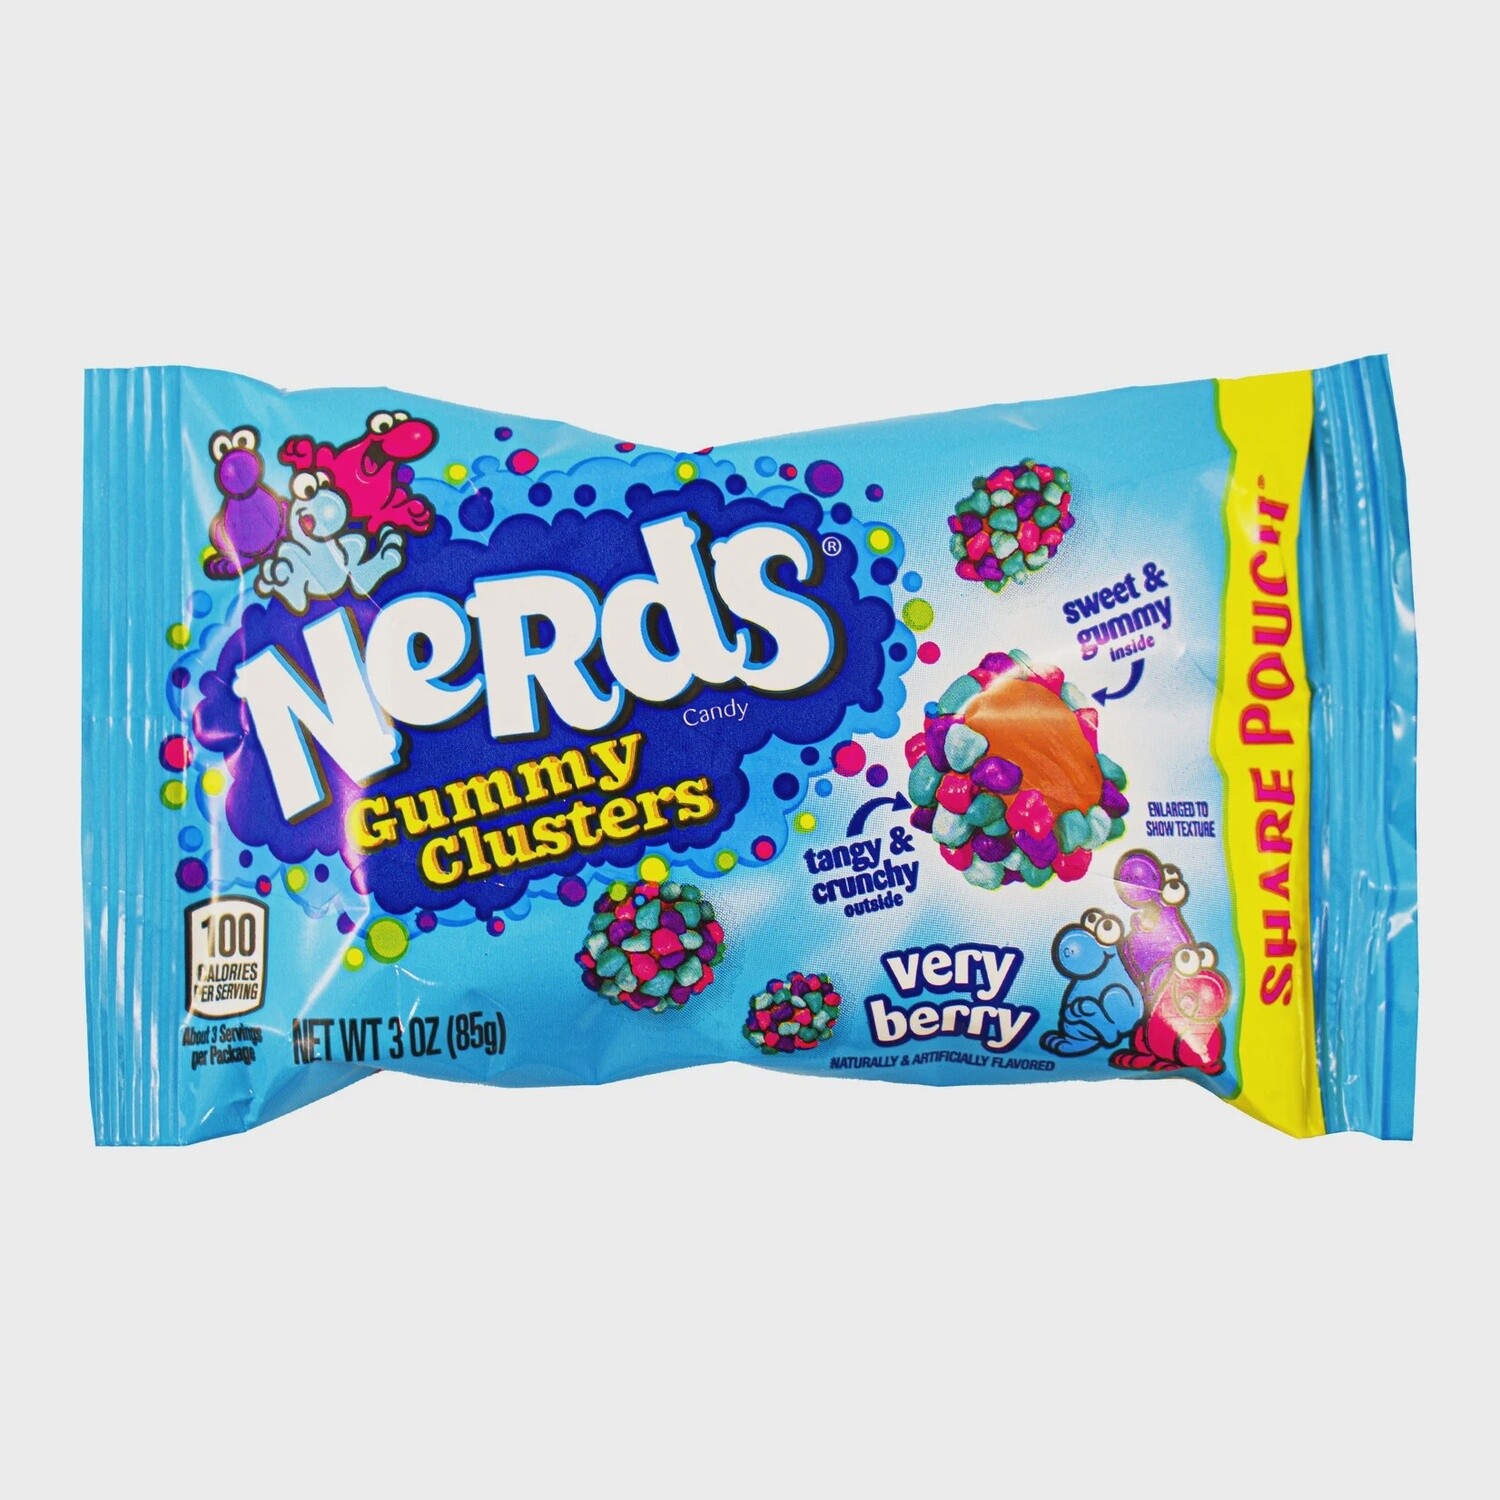 Nerds Gummy Clusters very berry 85g